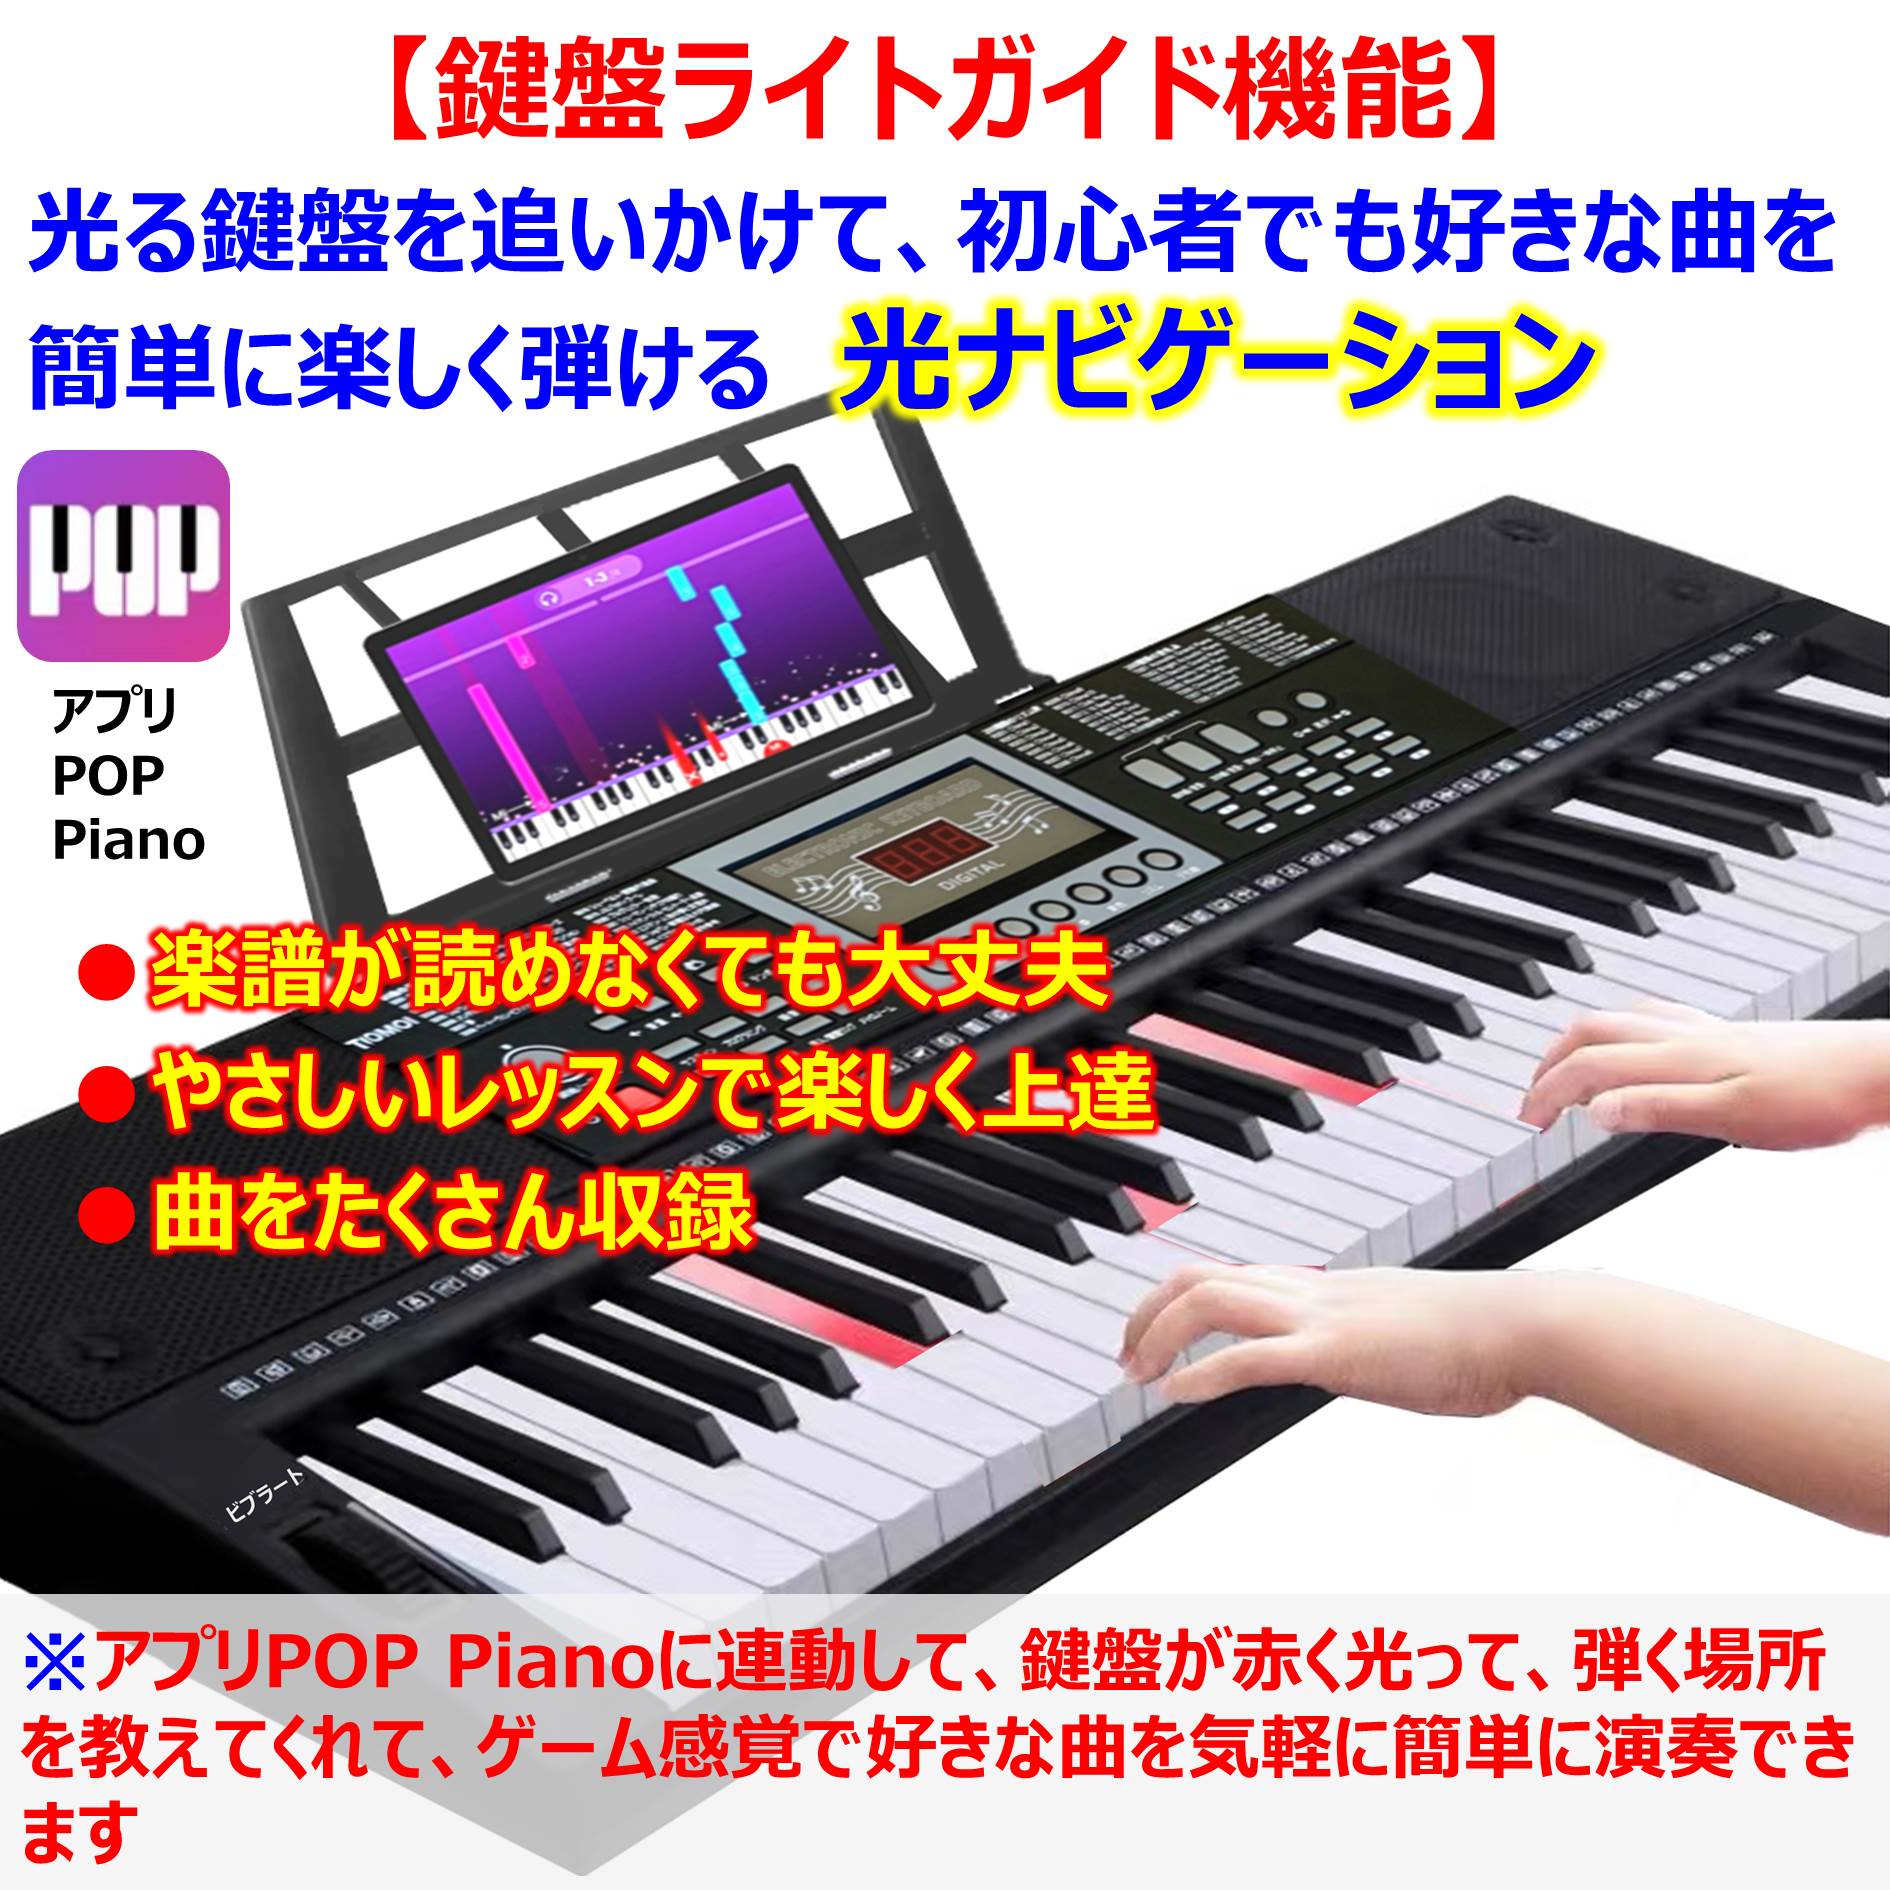 [ stand set Appli synchronizated keyboard shines Japanese inscription ] electron keyboard 61 keyboard light guide light navigation battery supply of electricity possibility Mike music stand earphone attached 